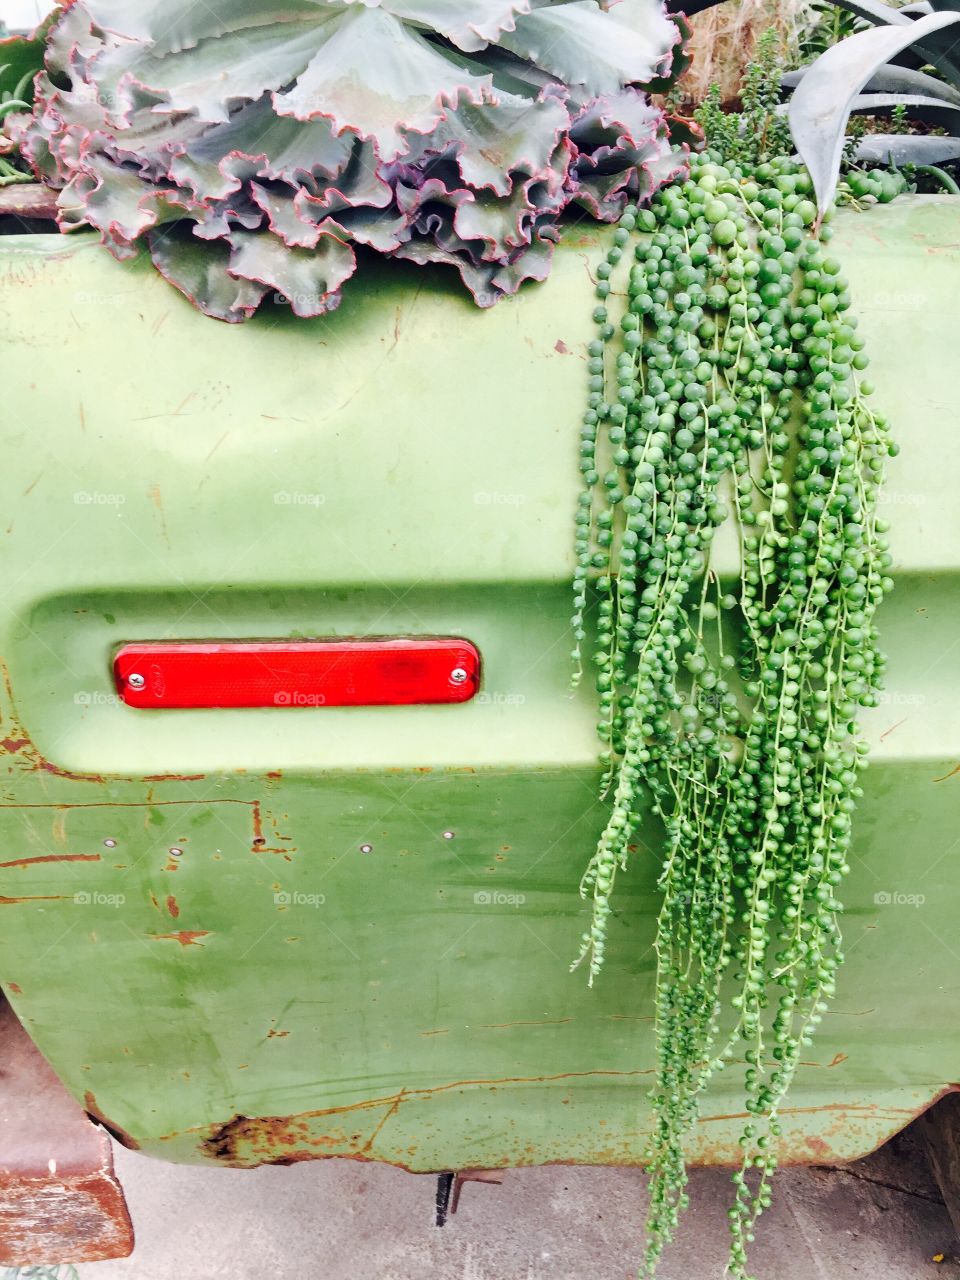 Green Color Story - right rear panel of a pickup truck being used as a planter